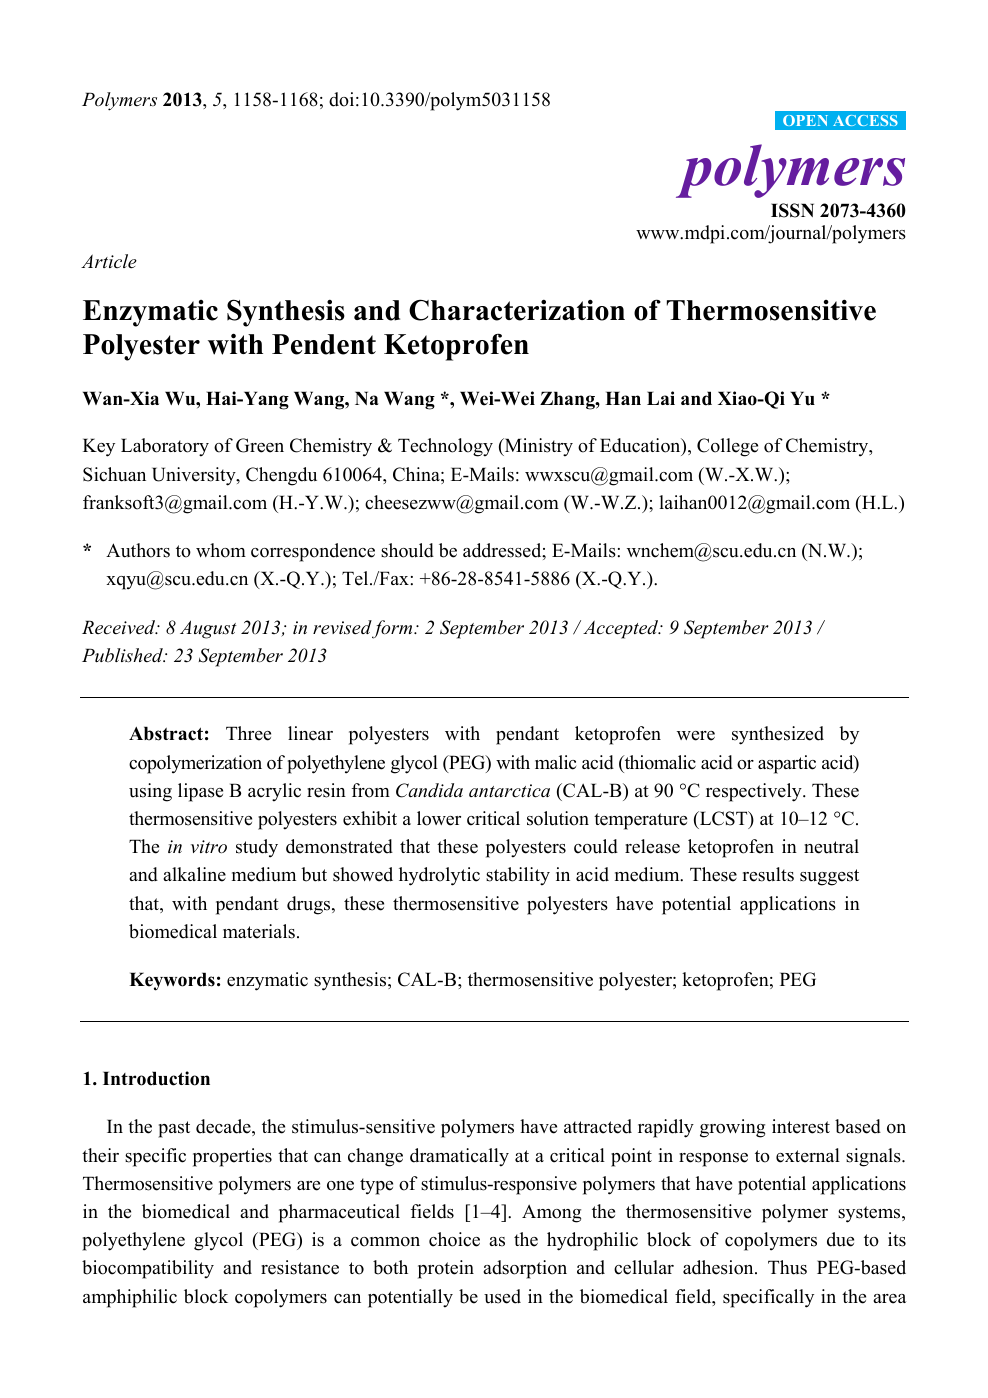 Enzymatic Synthesis And Characterization Of Thermosensitive Polyester With Pendent Ketoprofen Topic Of Research Paper In Chemical Sciences Download Scholarly Article Pdf And Read For Free On Cyberleninka Open Science Hub